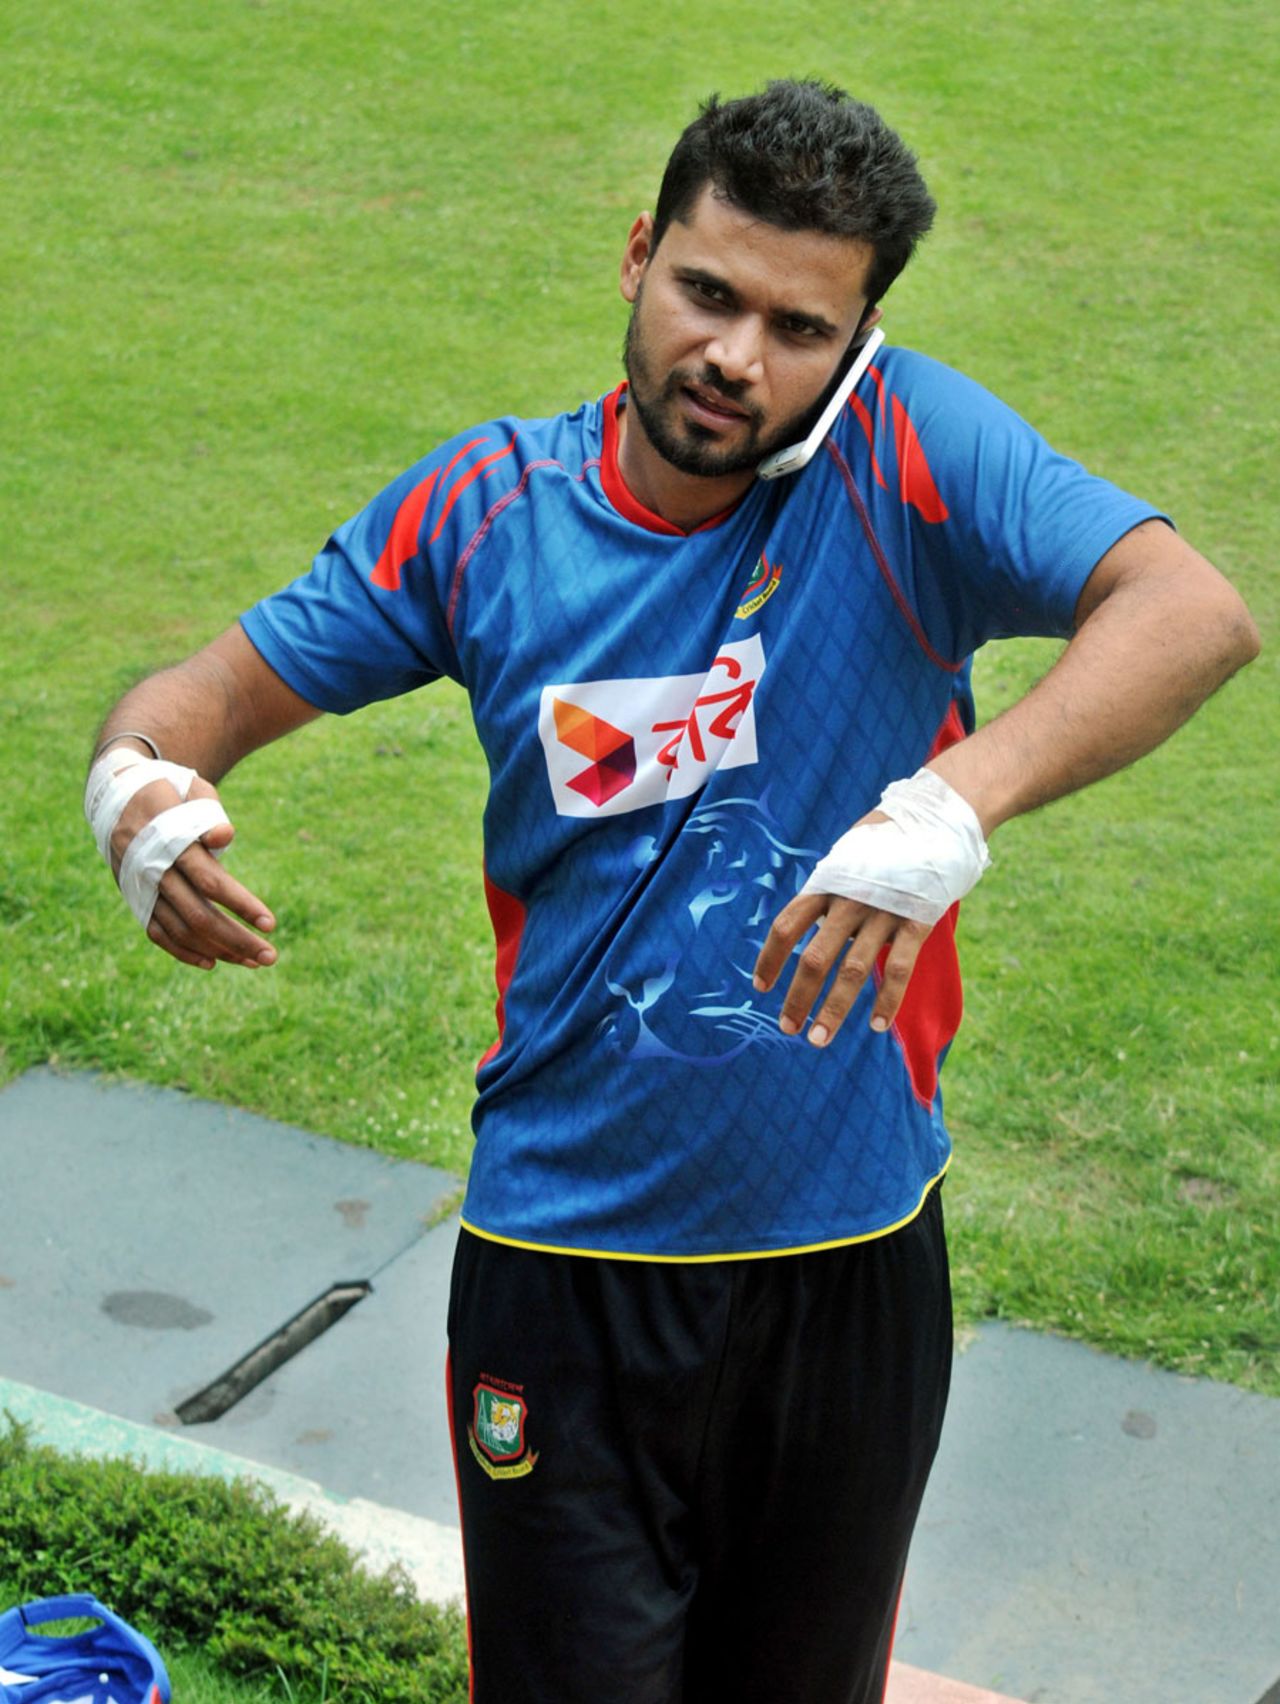 Mashrafe Mortaza suffered skin lacerations on his hands after avoiding an accident, Mirpur, June 4, 2015